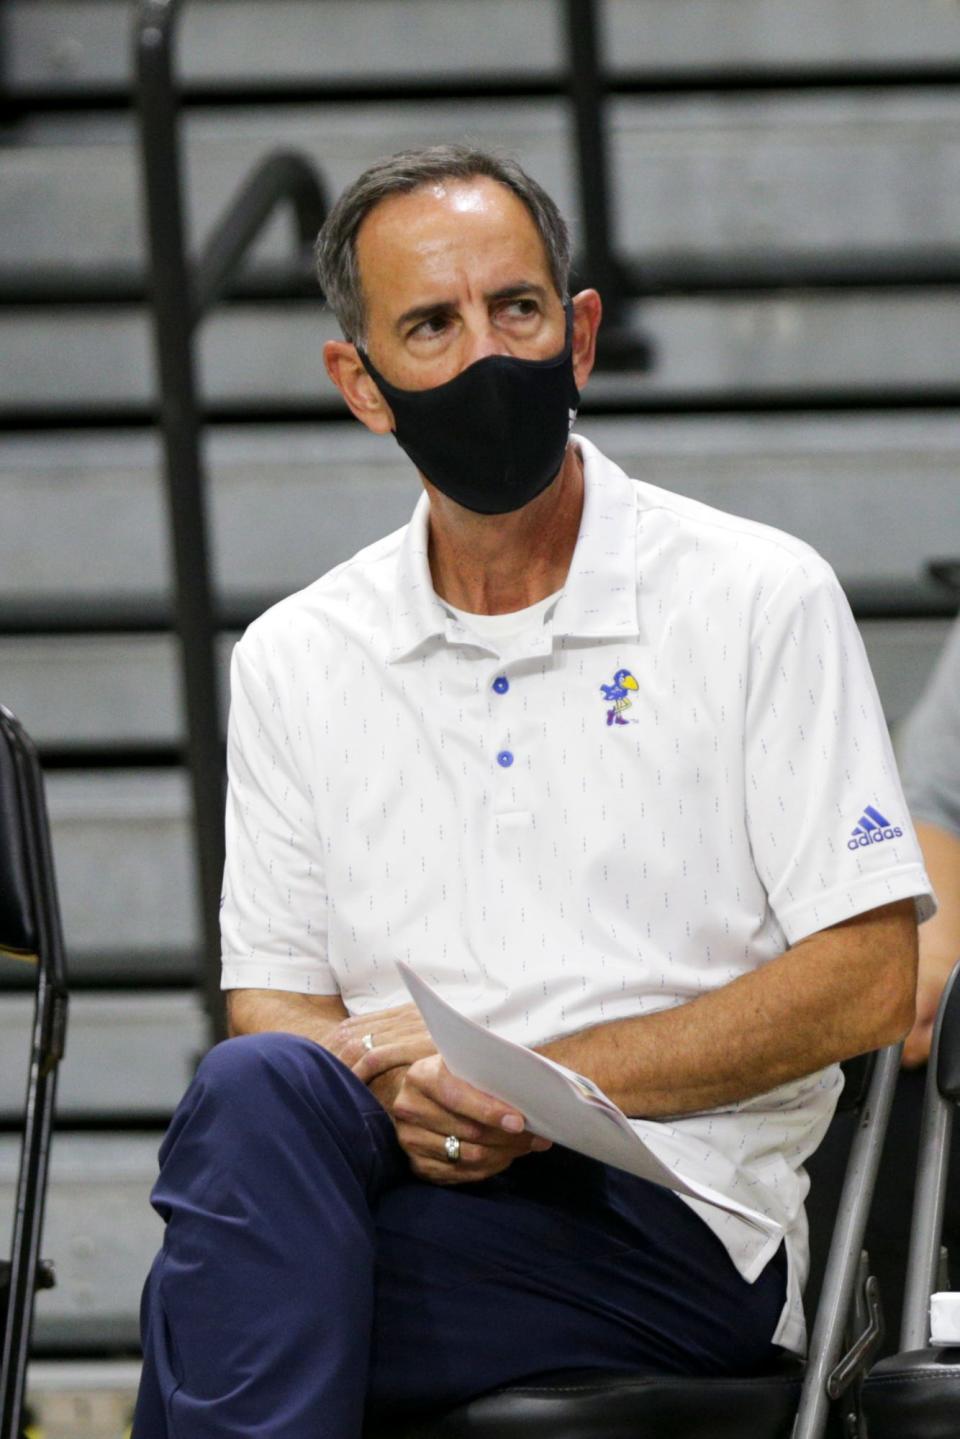 Kansas volleyball coach Ray Bechard looks on during the second set of a match in 2021 at Holloway Gymnasium in West Lafayette, Indiana.